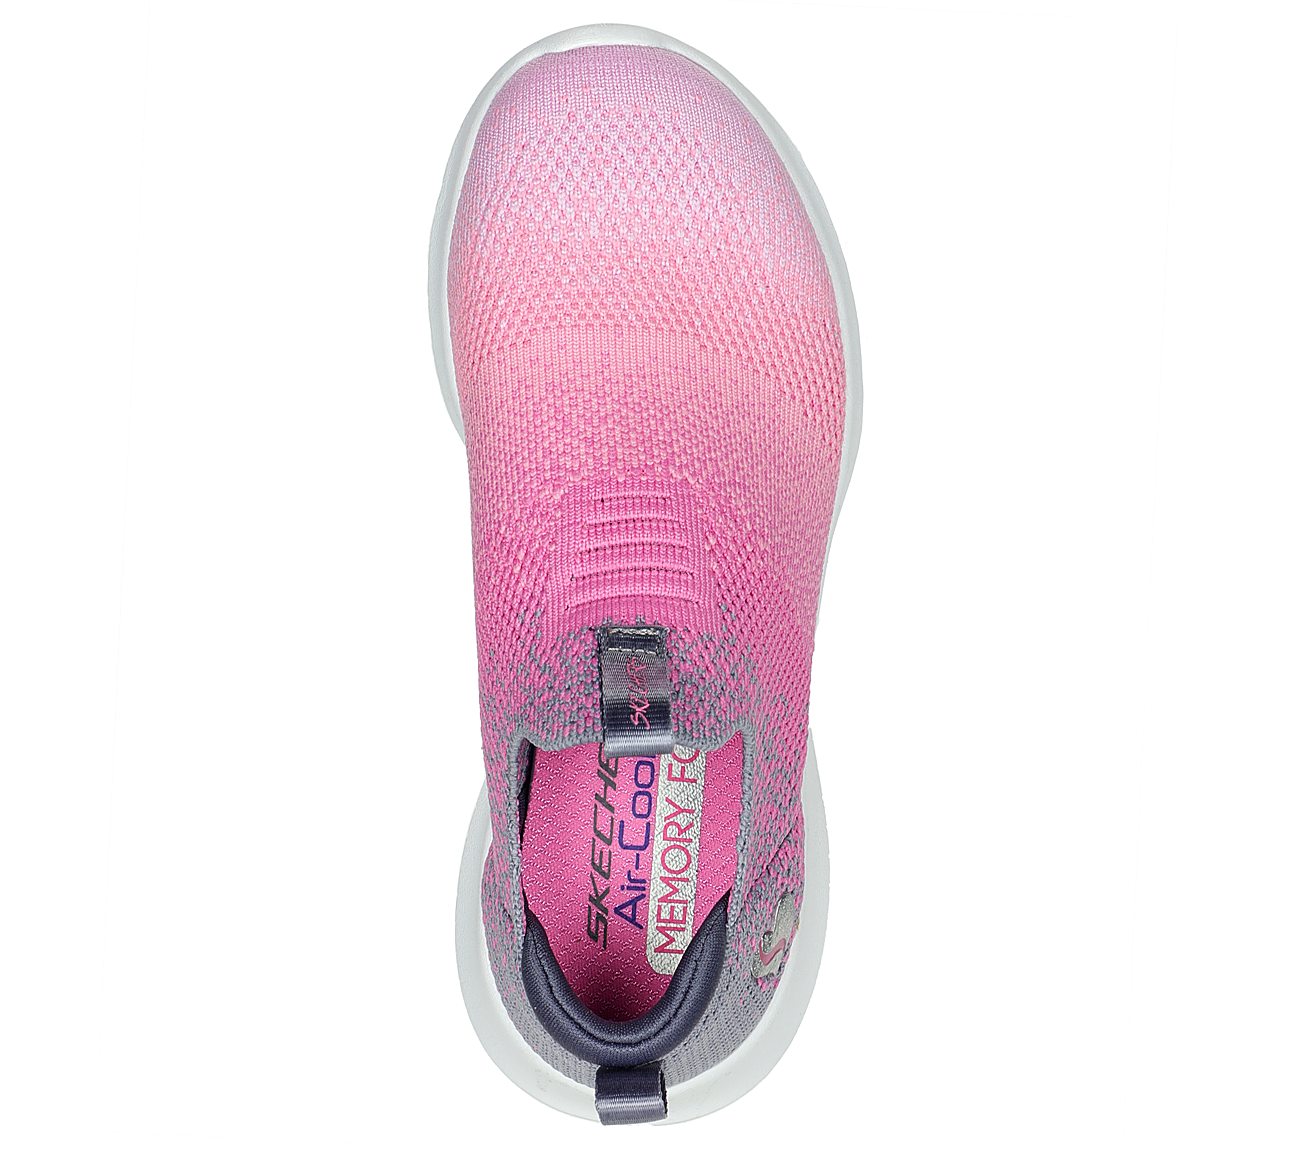 ULTRA FLEX - COLOR PERFECT, PINK/MULTI Footwear Top View